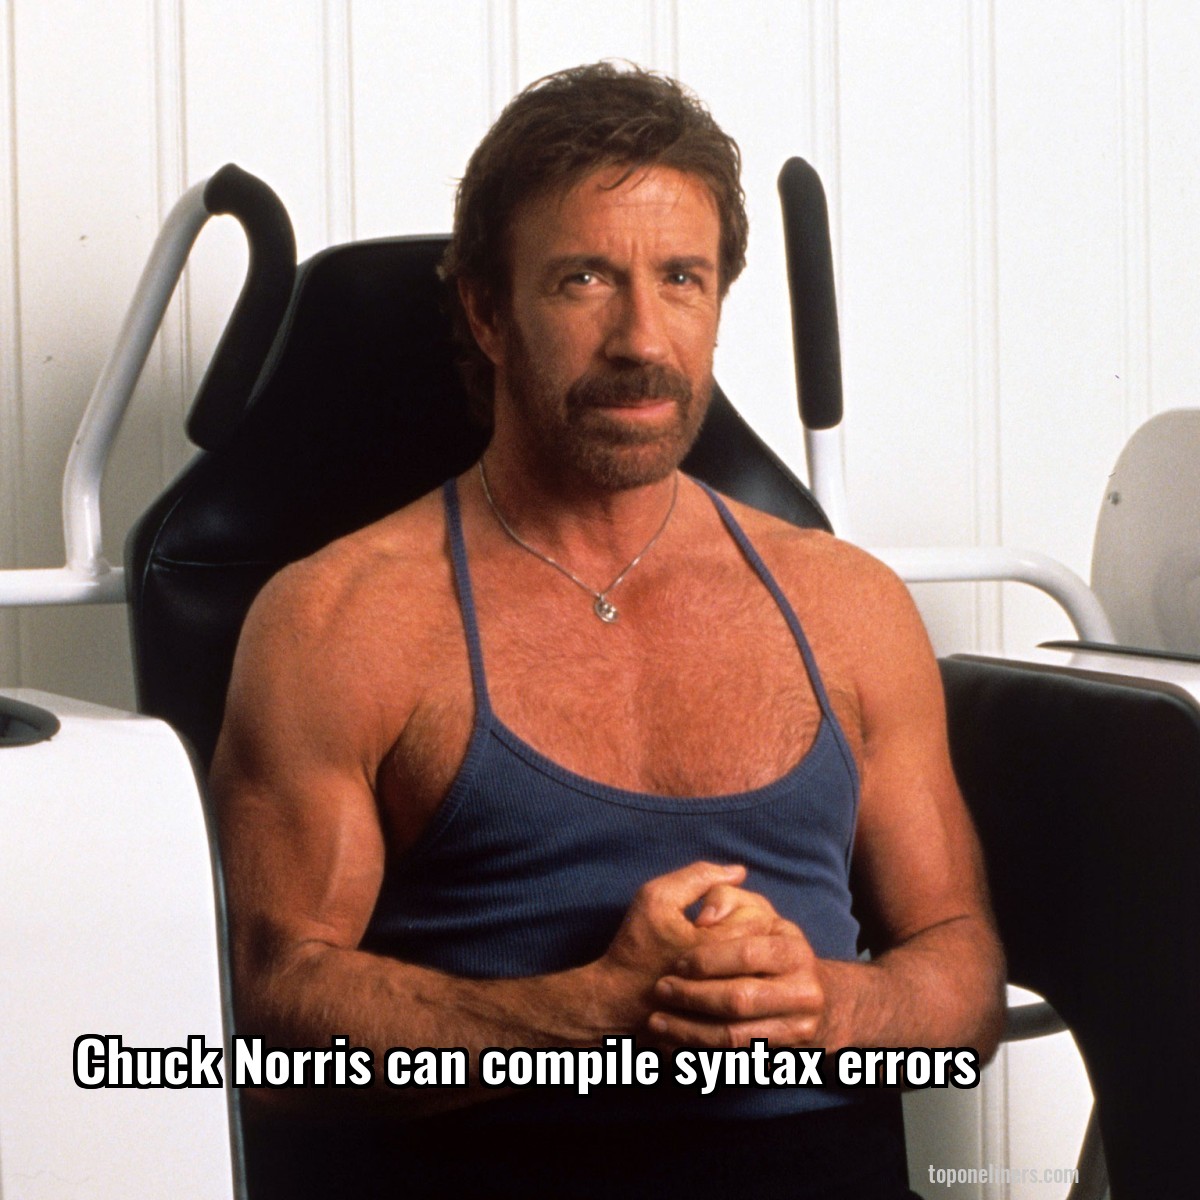 Chuck Norris can compile syntax errors